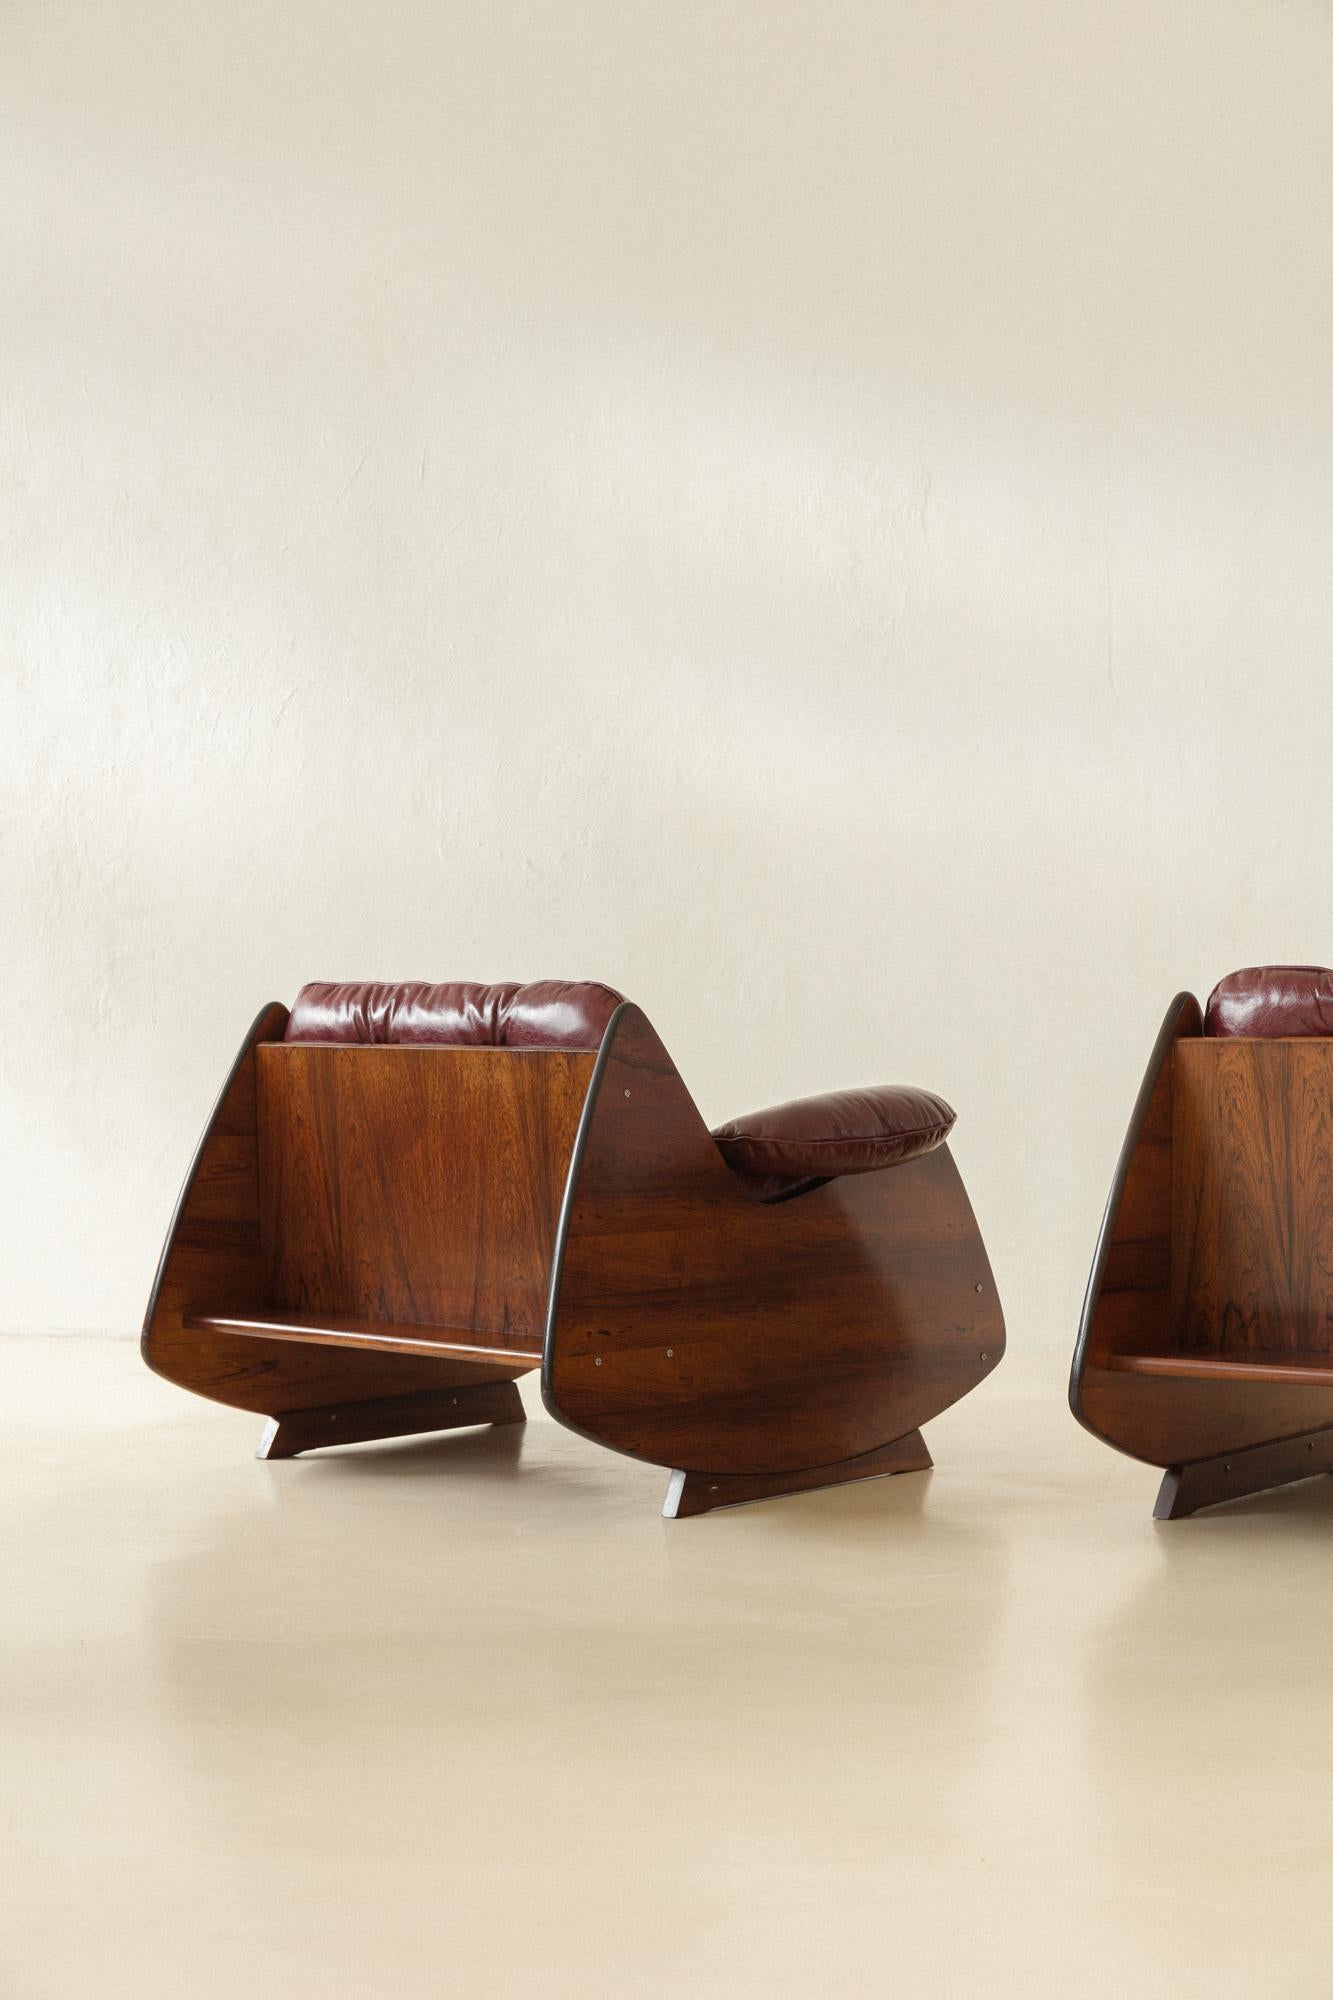 Mid-20th Century Rosewood Armchairs attributed to Jorge Zalszupin, 1960s, Brazilian Midcentury